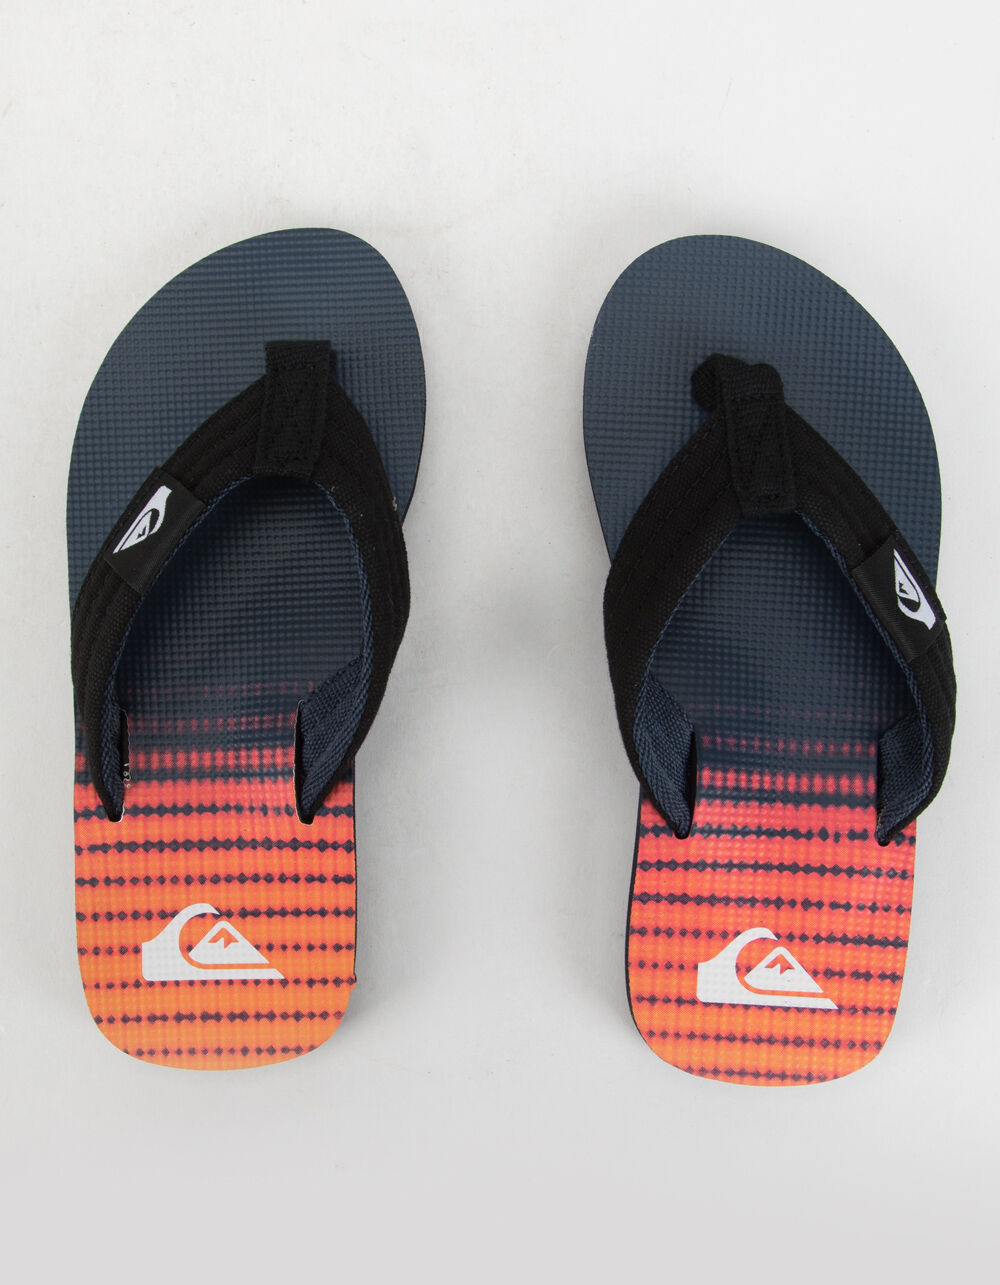 QUIKSILVER Molokai Layback Boys Sandals image number 4